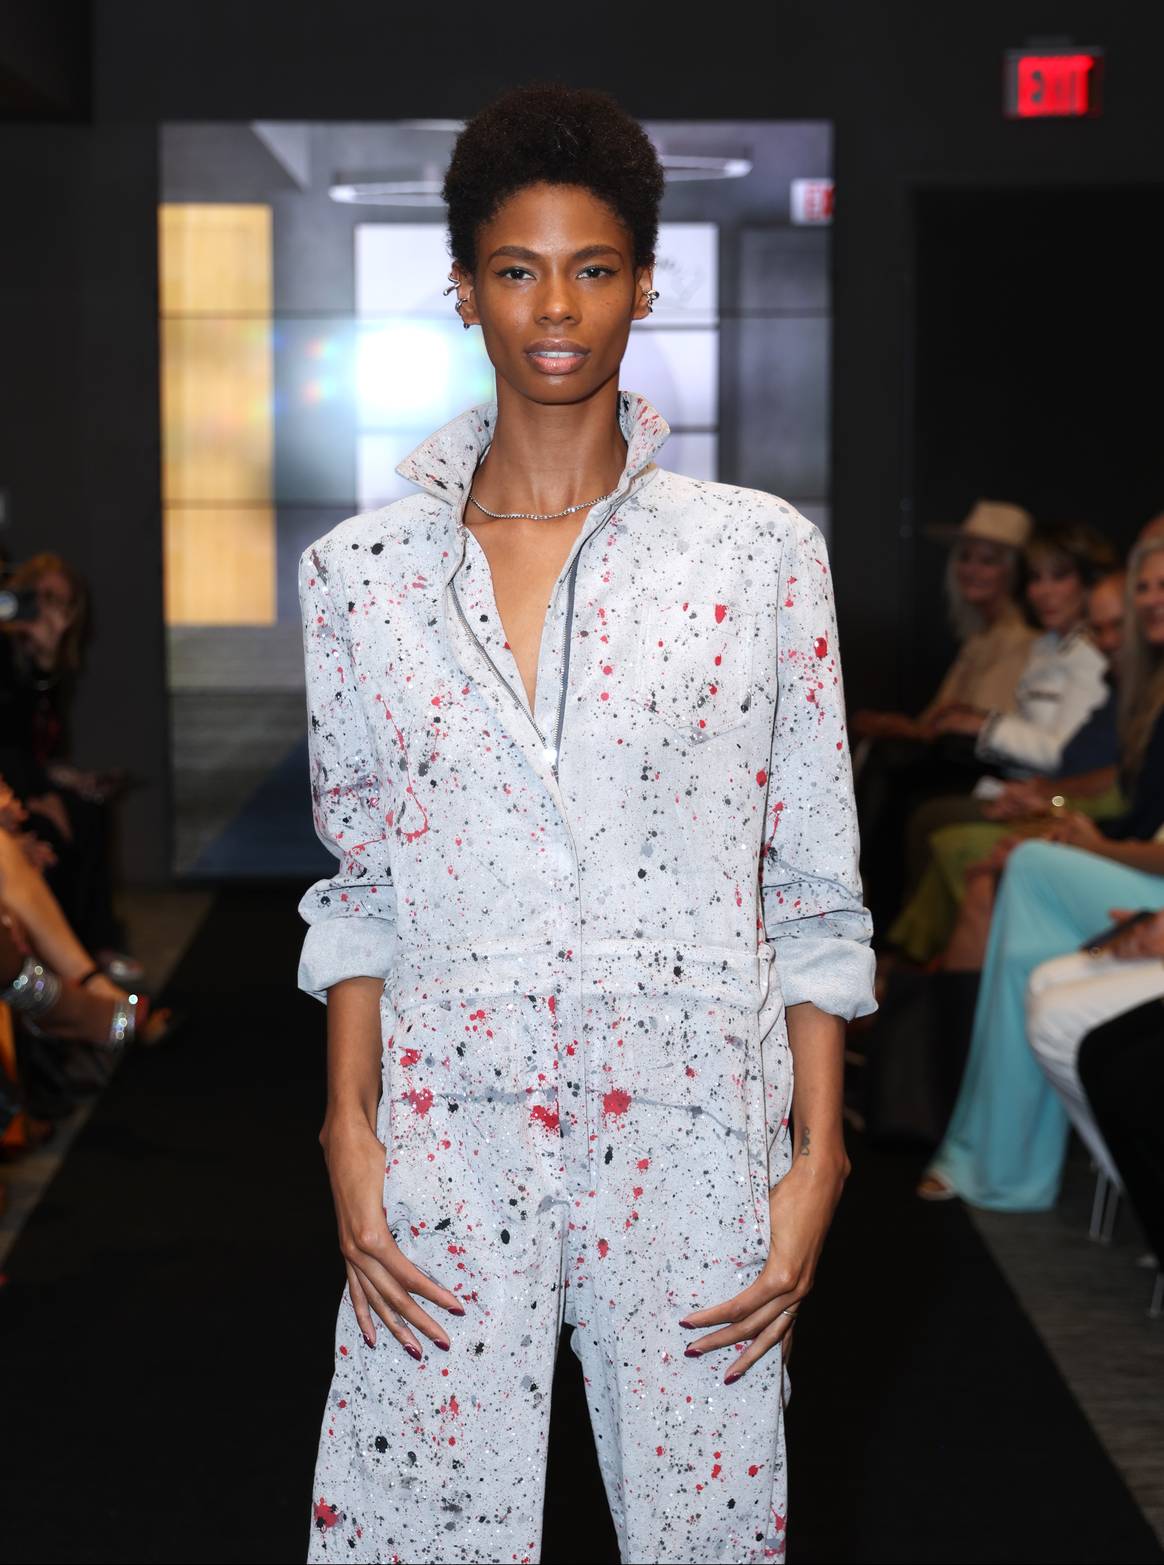 Model wearing the winning design by Ryan Anthony Hamilton during With Love Halston event hosted by Istituto Marangoni on 28 Nov. 2022 in Miami, Florida. Photo by Rodrigo Varela/Getty Images for Istituto Marangoni Miami.